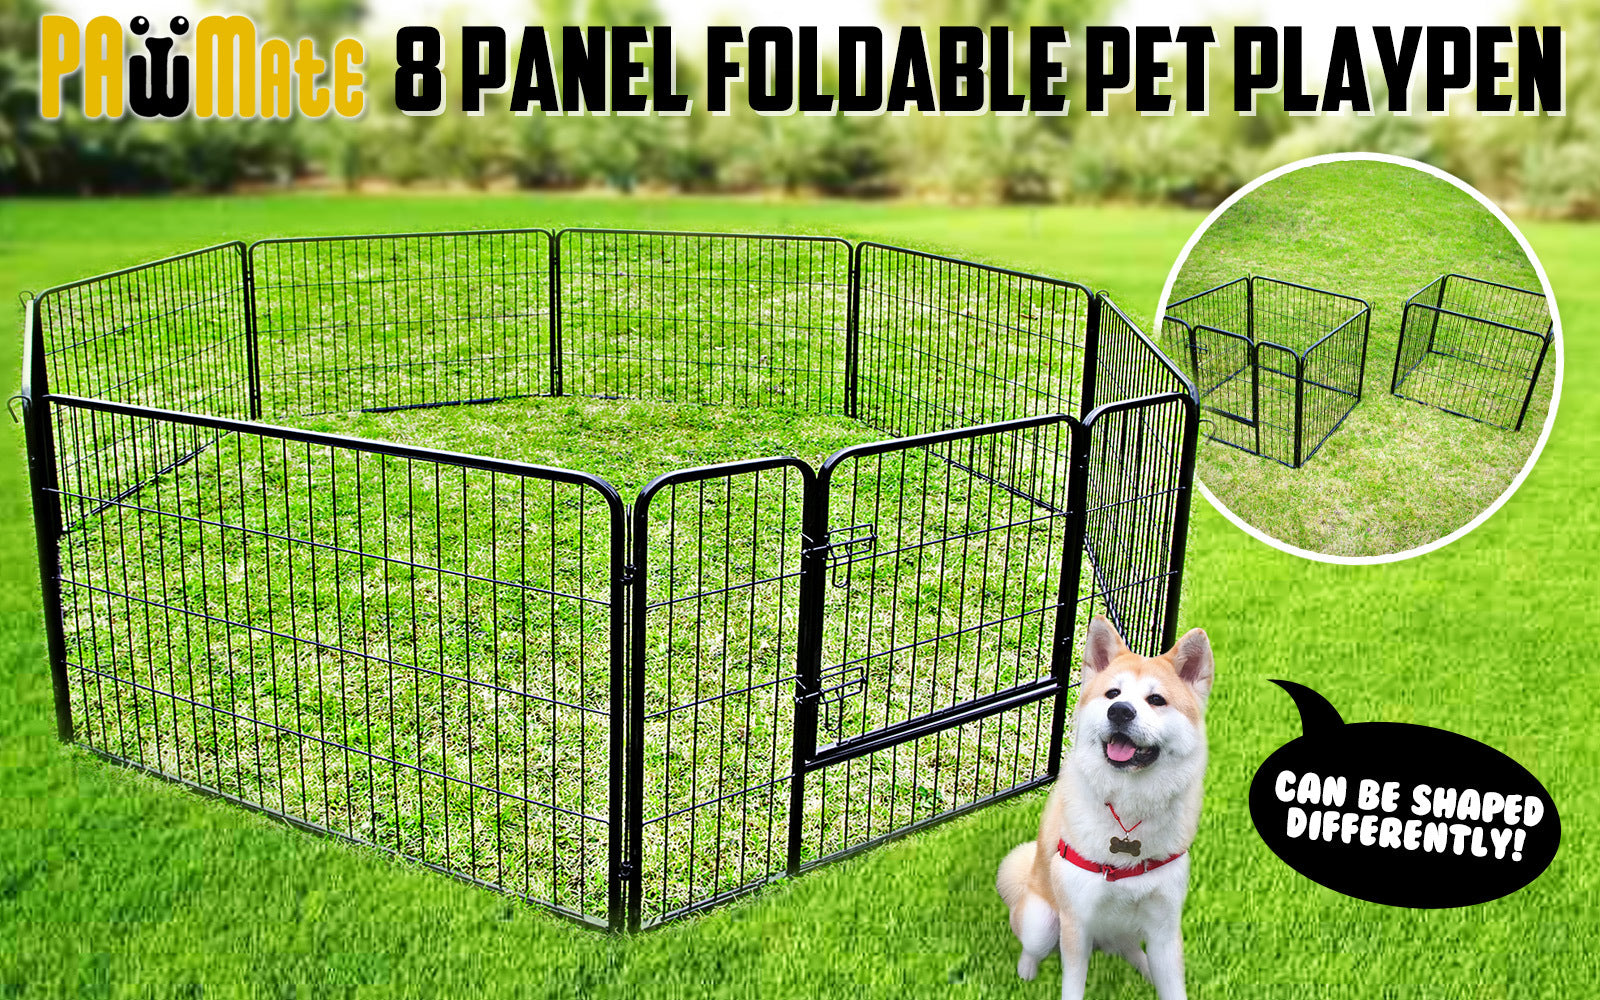 Pet Playpen Heavy Duty 32in 8 Panel Foldable Dog Cage + Cover - image2